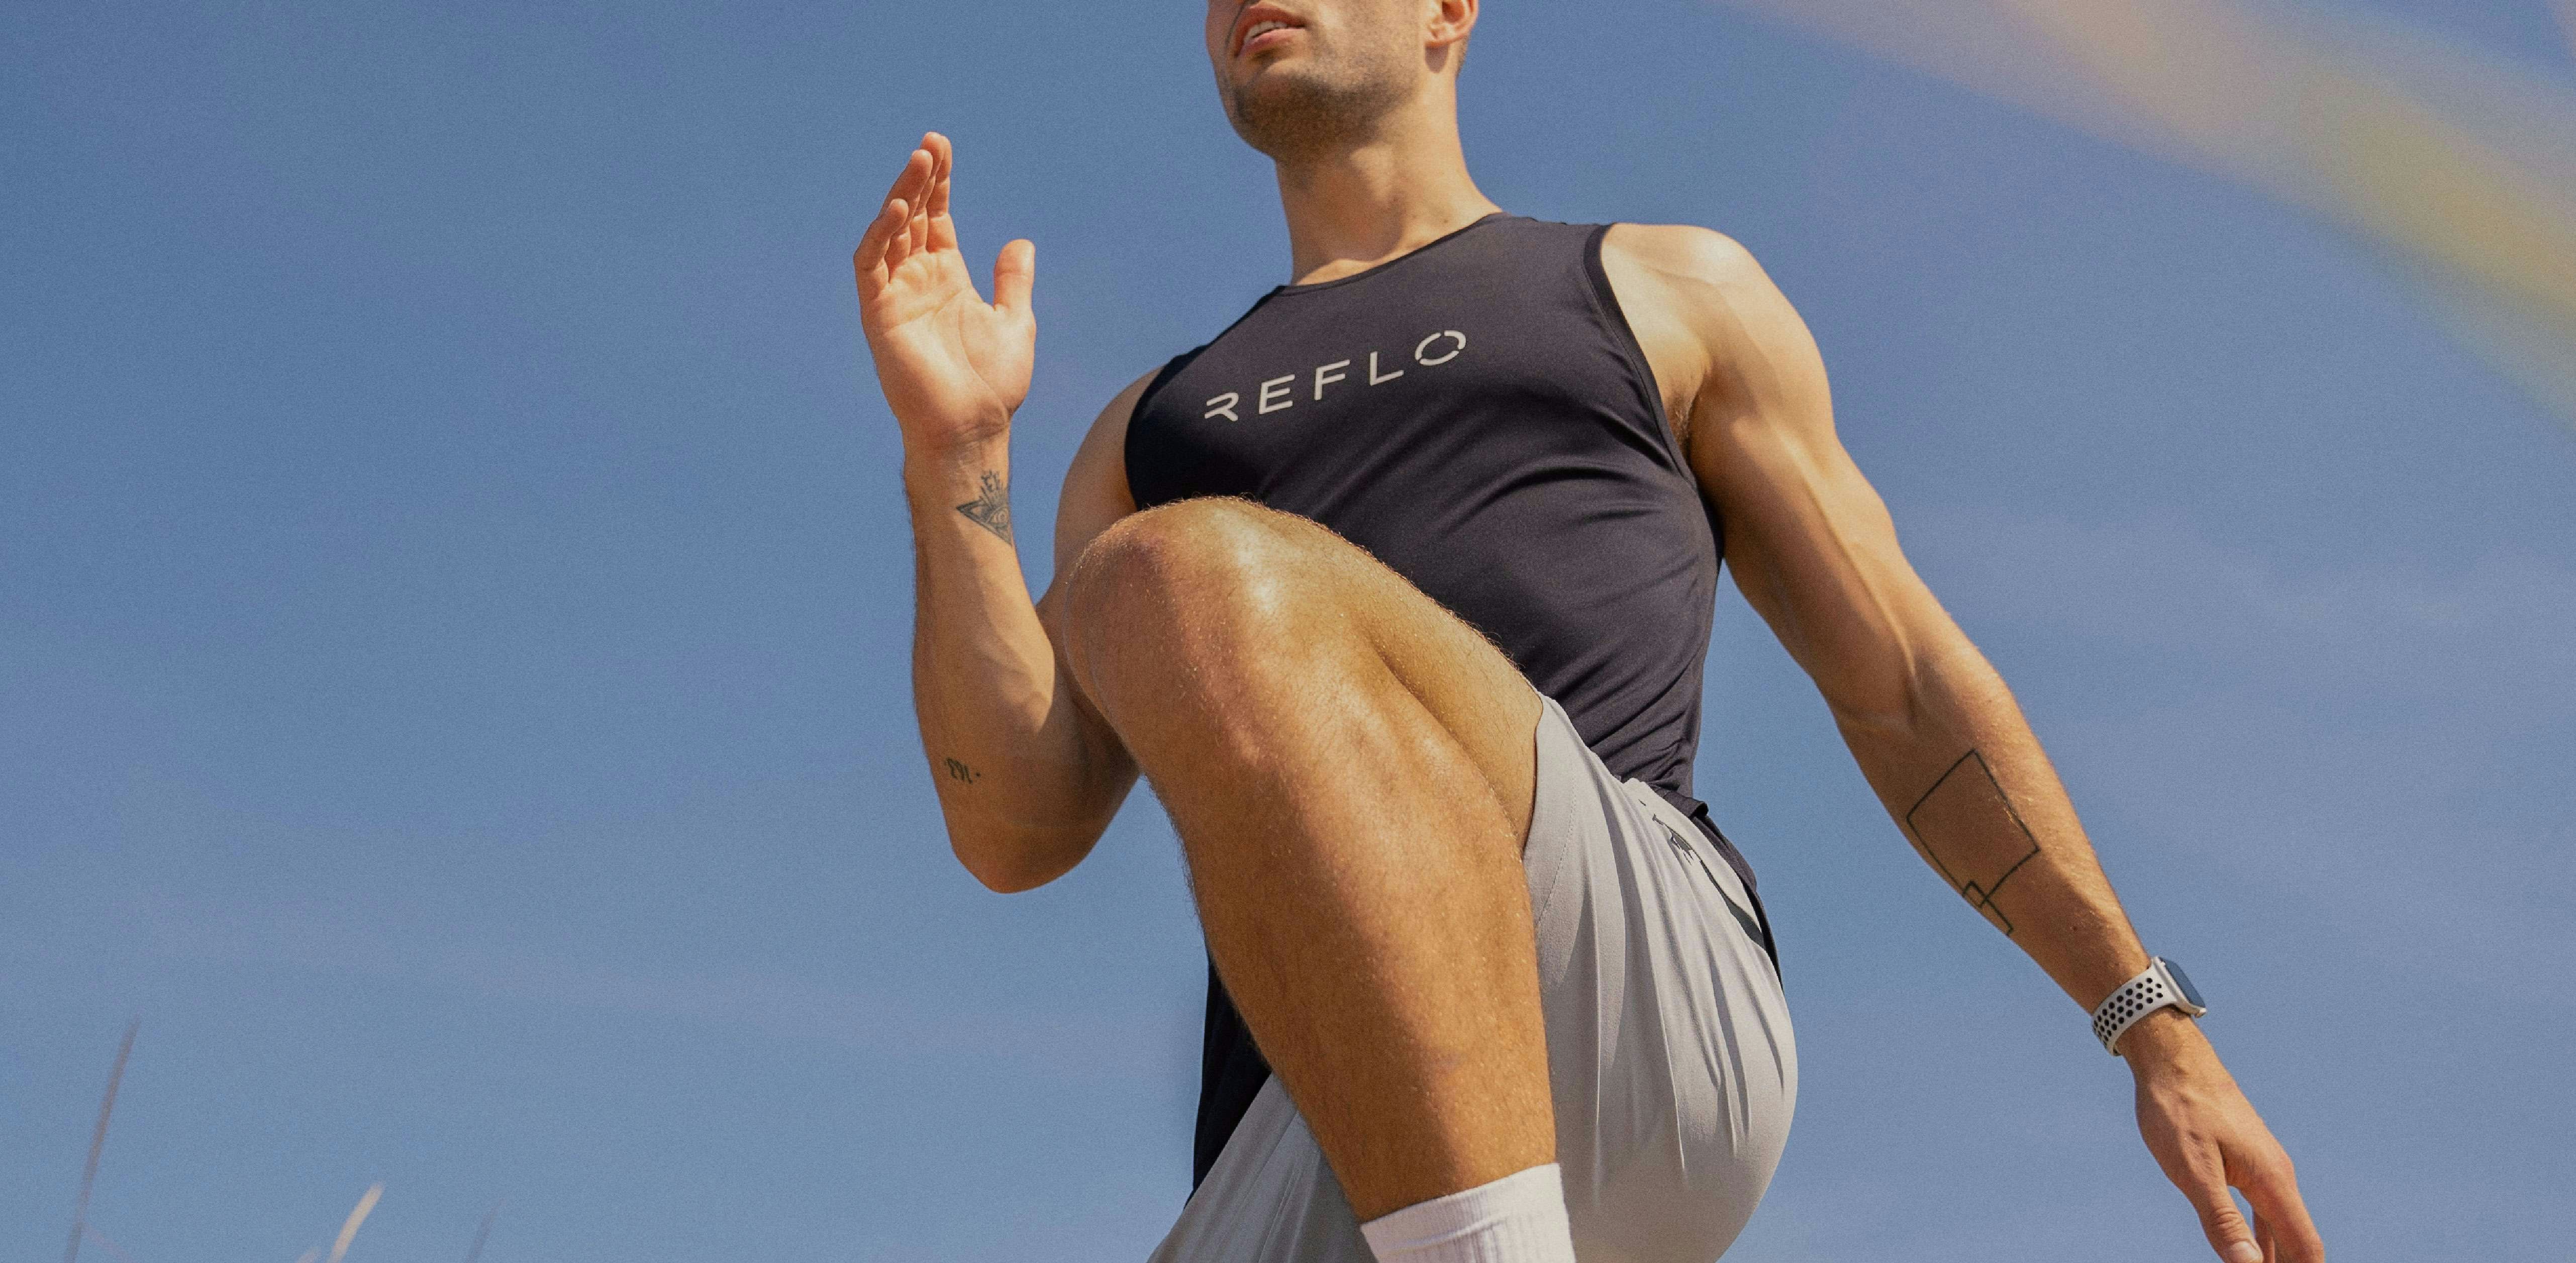 Man working out in Reflo clothing